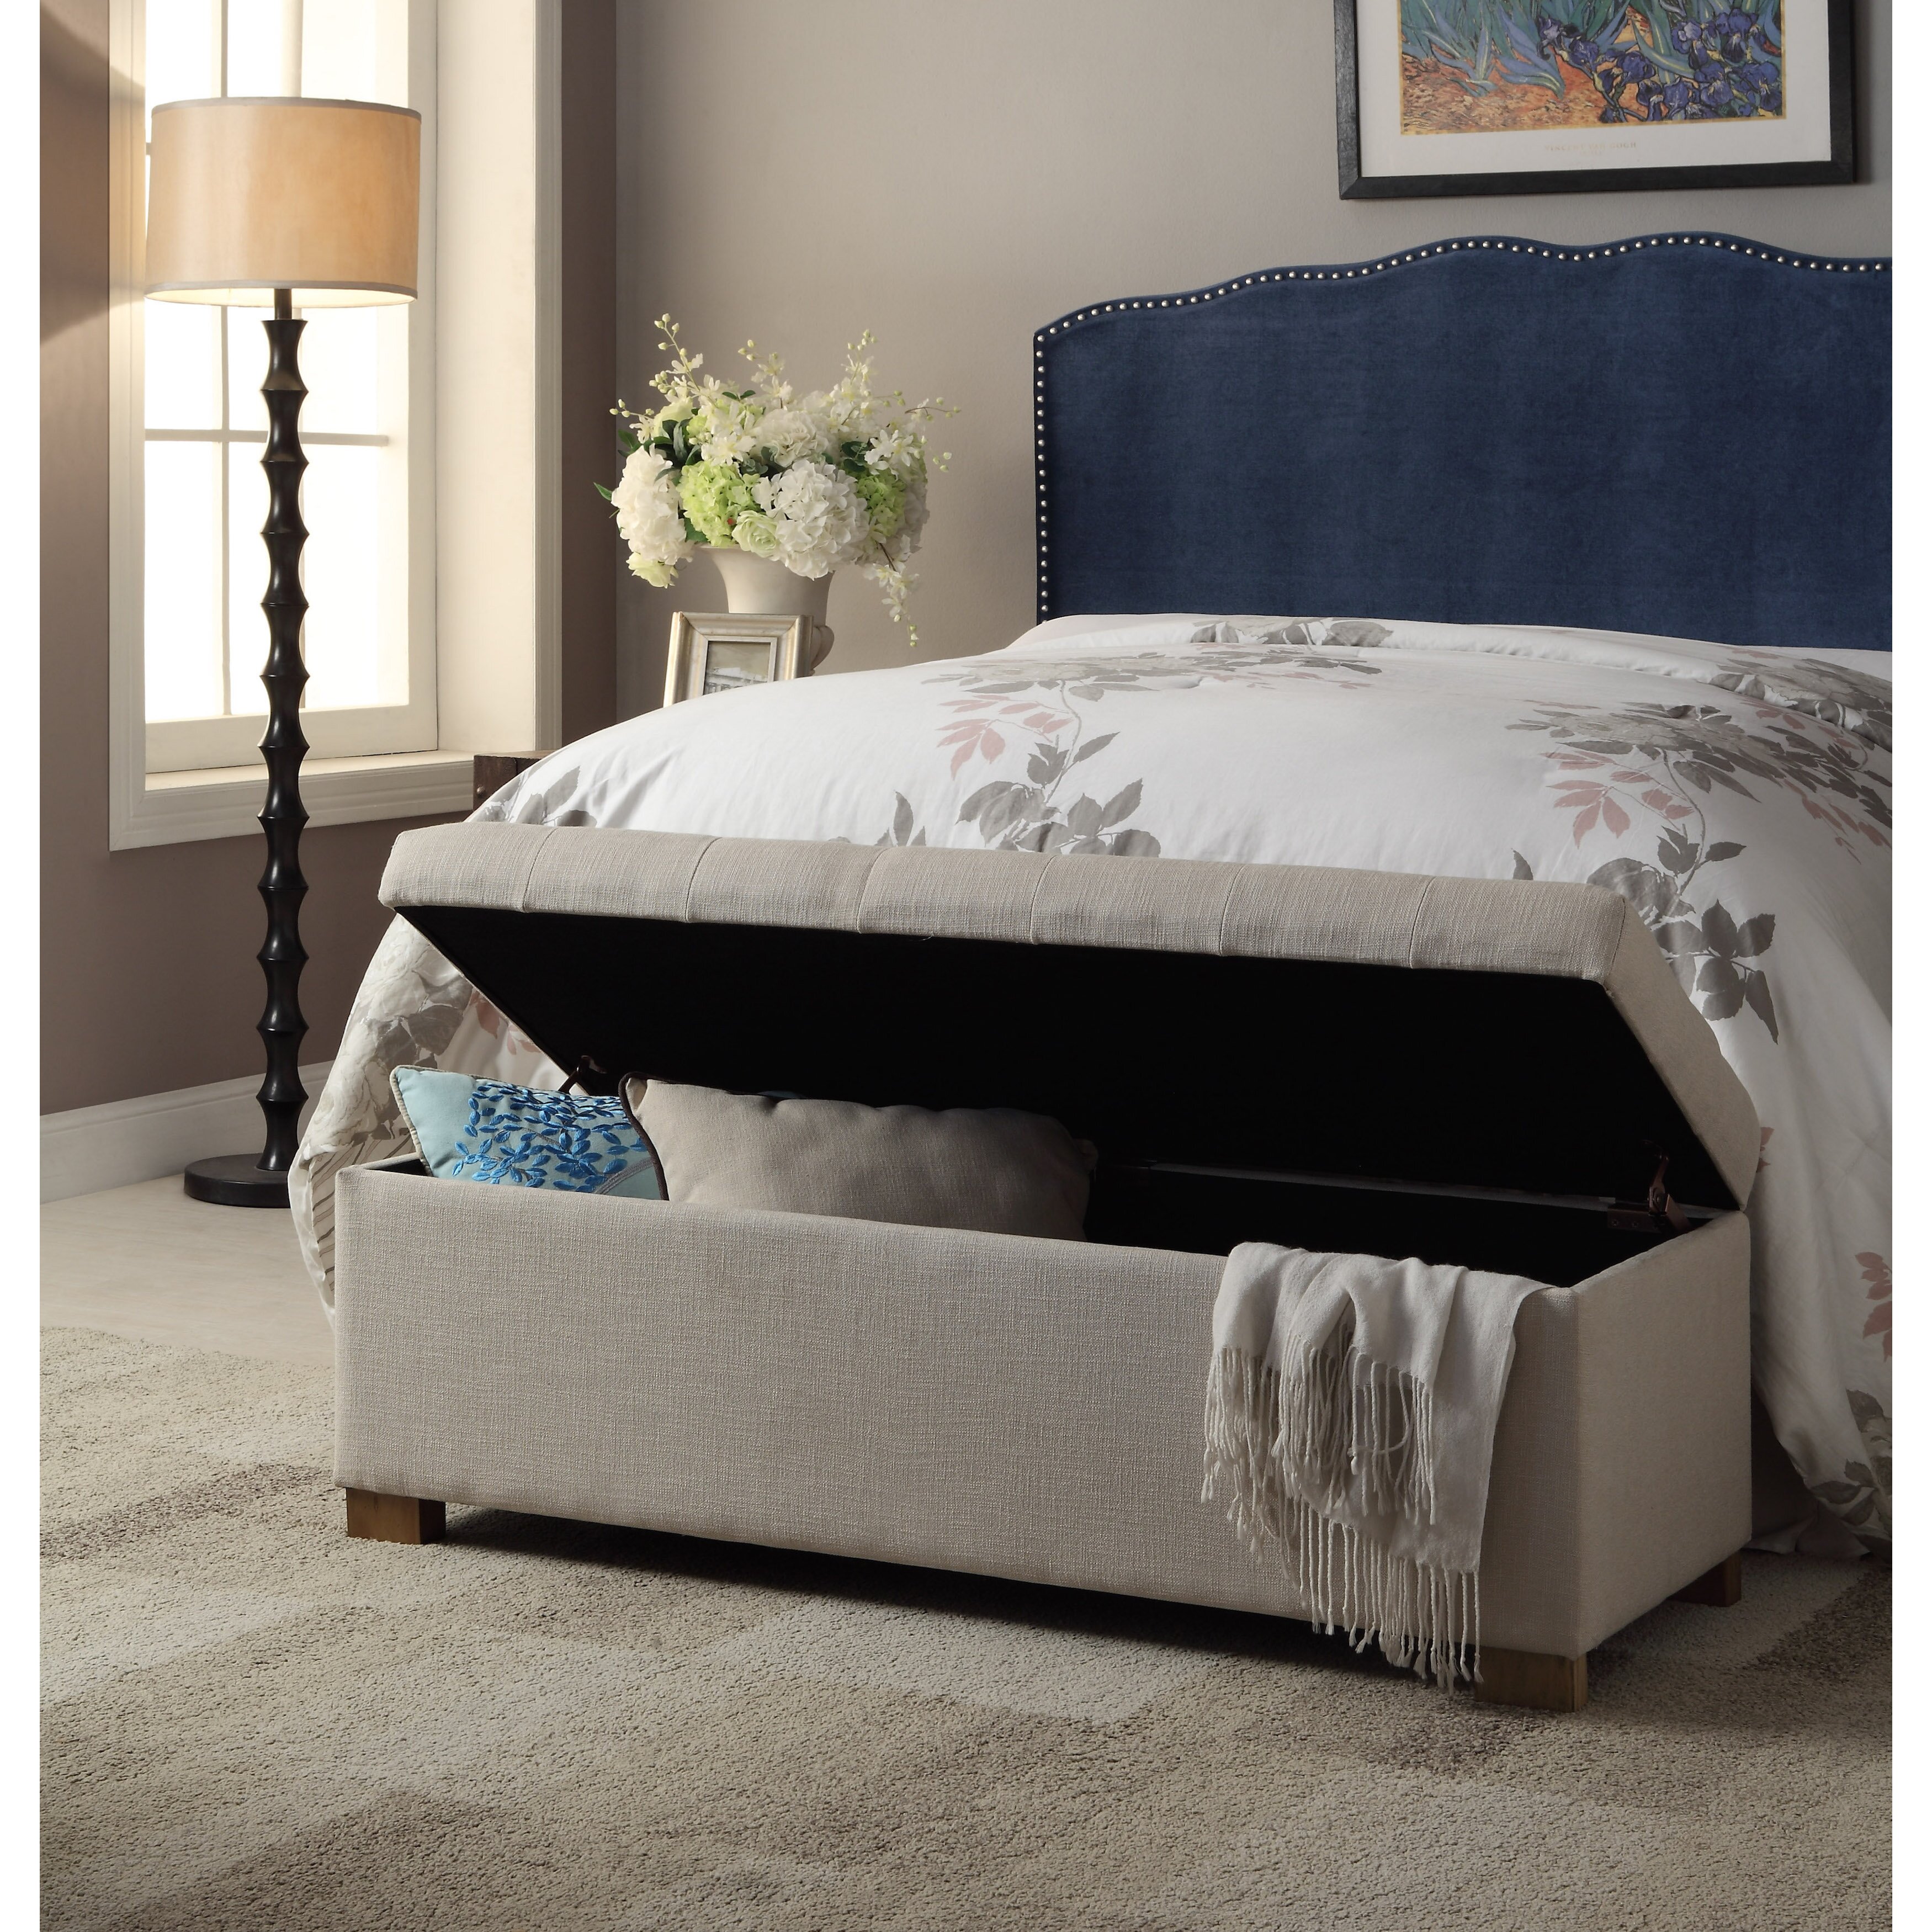 The Benefits Of Investing In A Bedroom Storage Bench